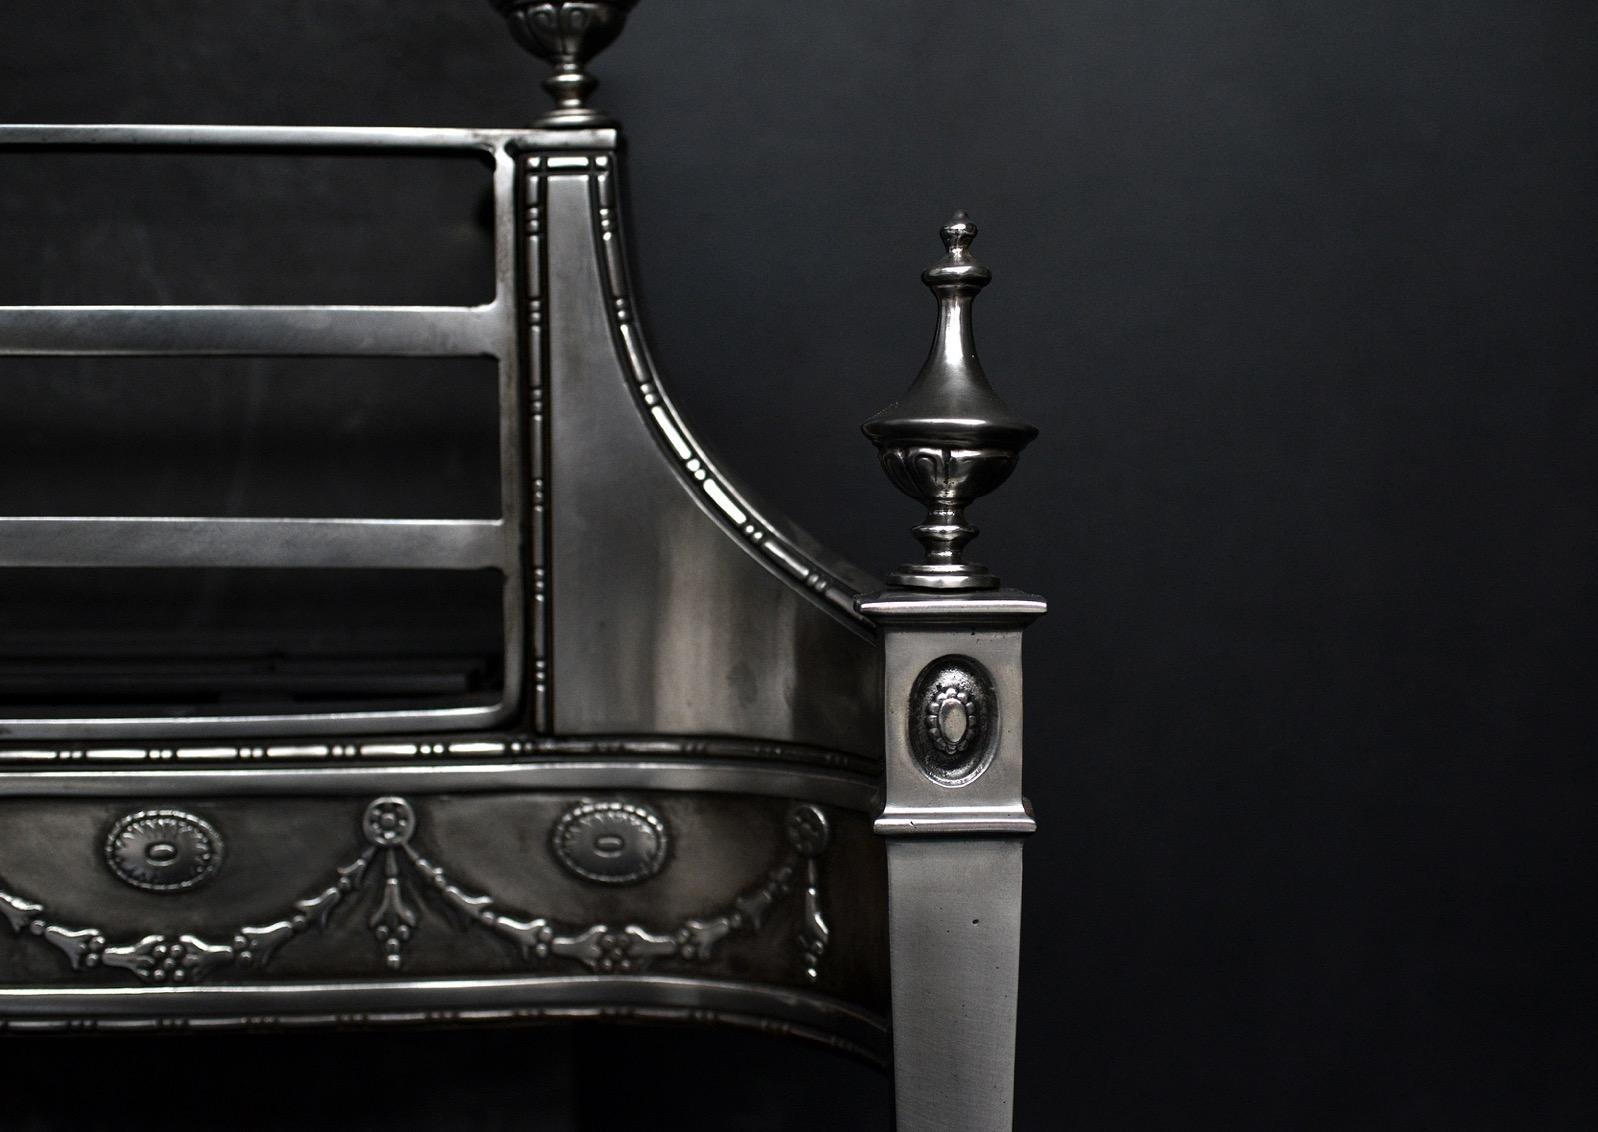 A George III style polished steel firegrate. The tapering legs surmounted by urn finials, the fret with swags and paterae throughout, with sausage-and-pea beading above and below. Plain cast iron fireback behind. English, circa 1900.

Width At